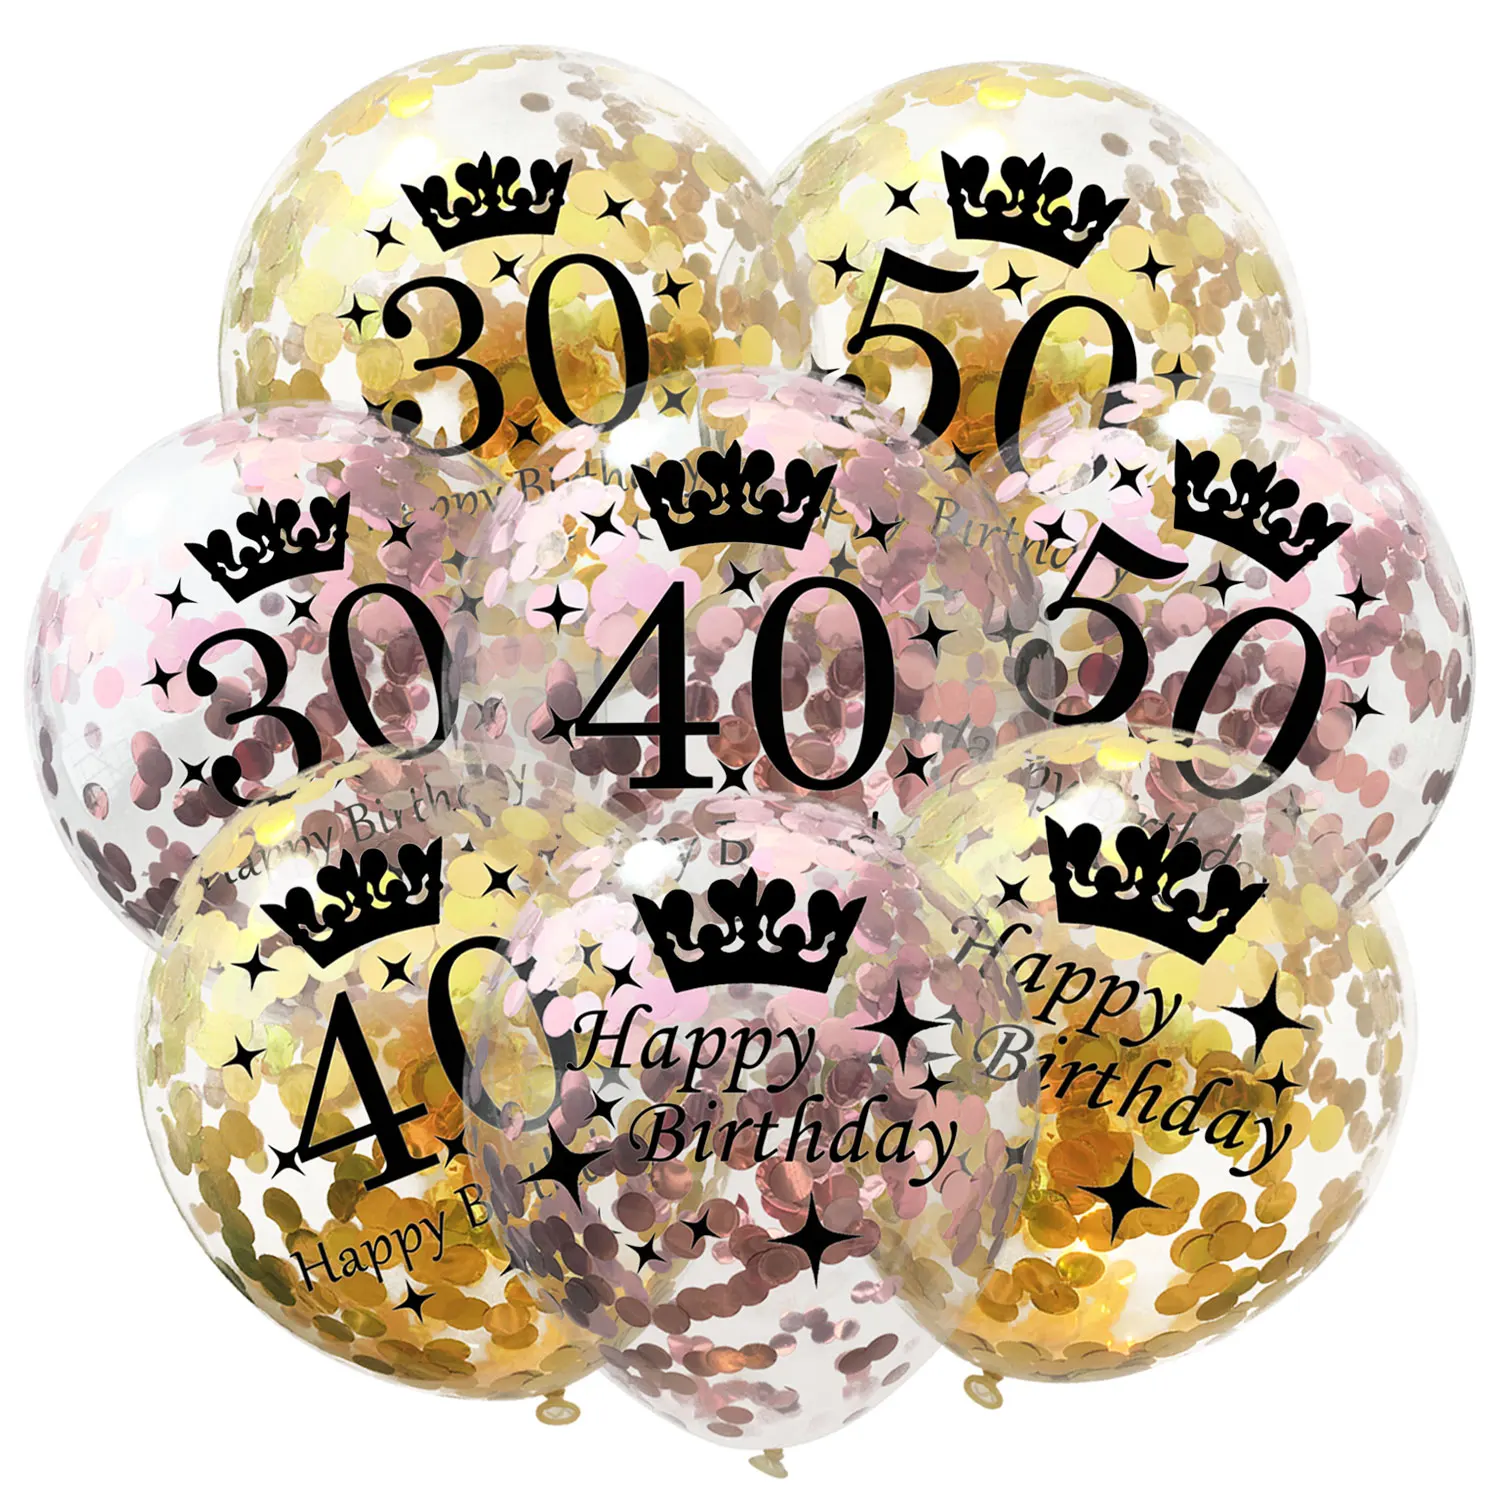 Happy Birthday Confetti Balloon Number Balloon Adult Birthday Cake Topper Gift Sticker For 16 18 21 30 40 50 60 Years Decoration